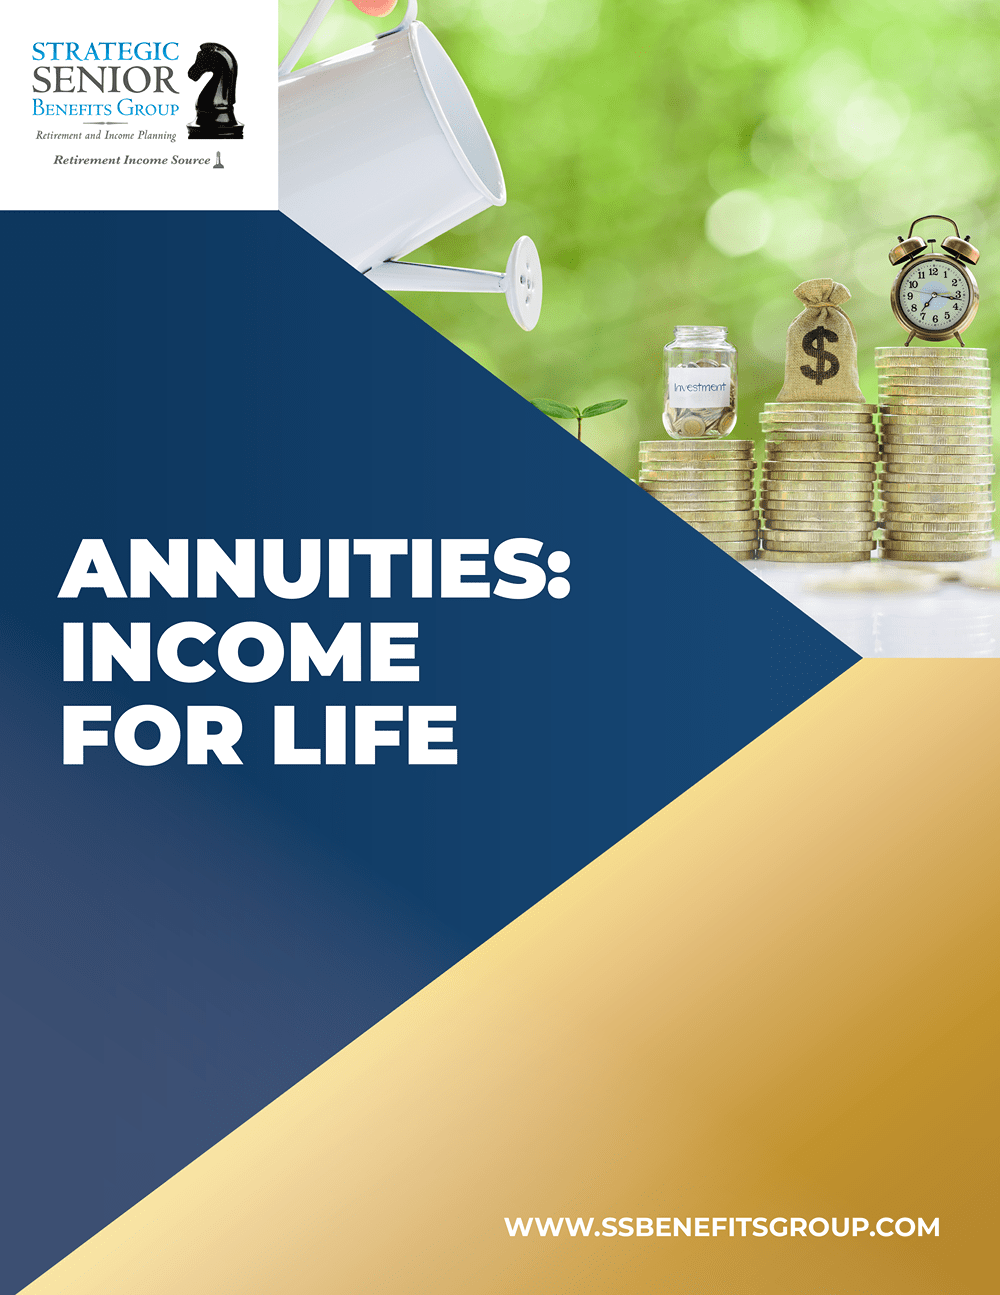 Strategic Senior Benefits Group - Annuities-Income for Life-1